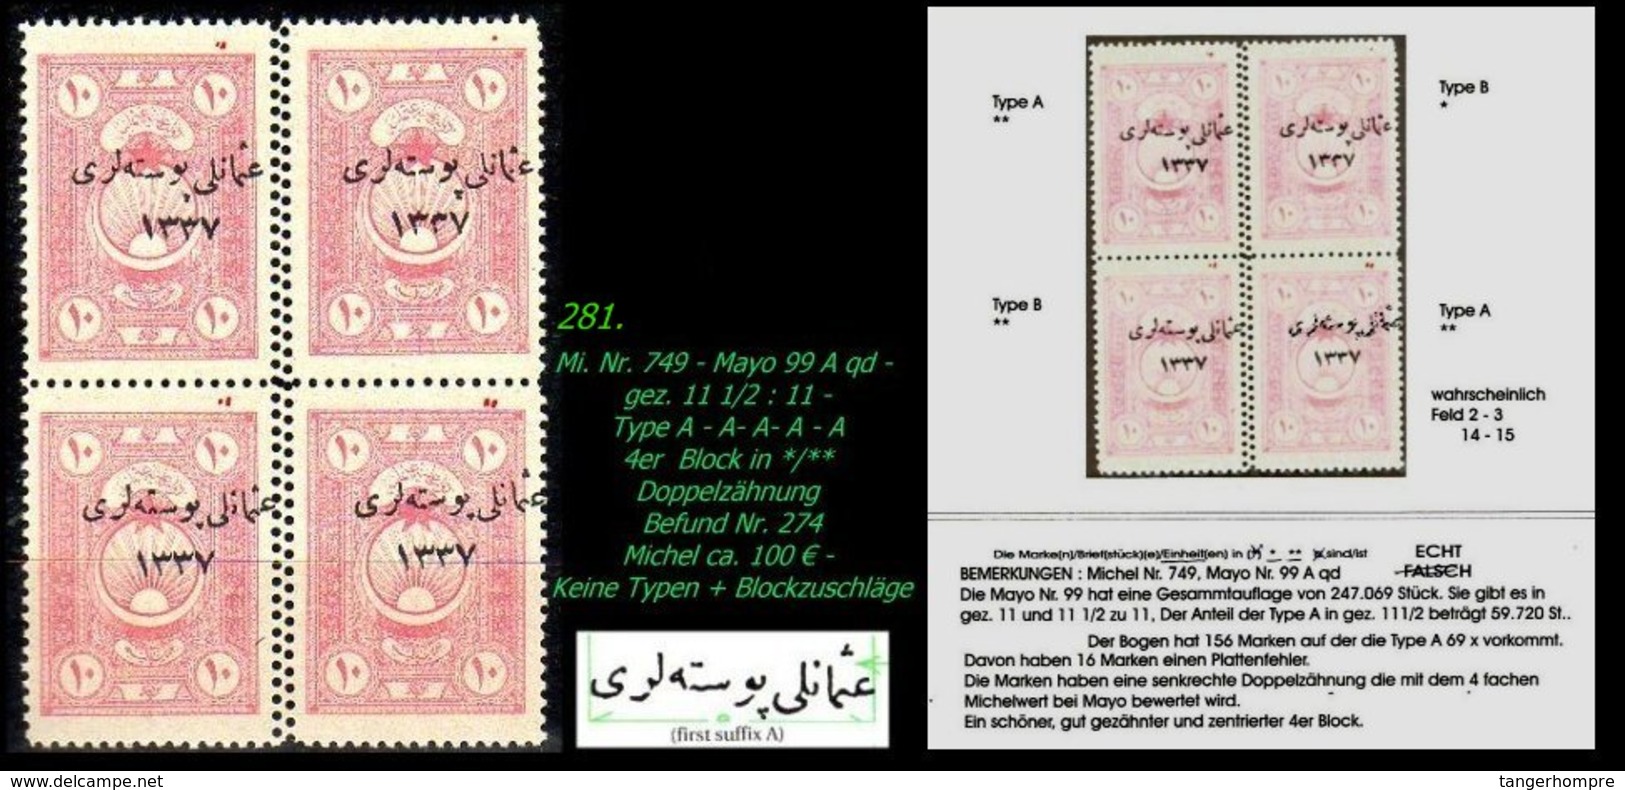 EARLY OTTOMAN SPECIALIZED FOR SPECIALIST, SEE...Mi. Nr. 749 - Mayo 99 Aqd- Doppeltgezähnt Im 4er Block -RR- - 1920-21 Anatolie